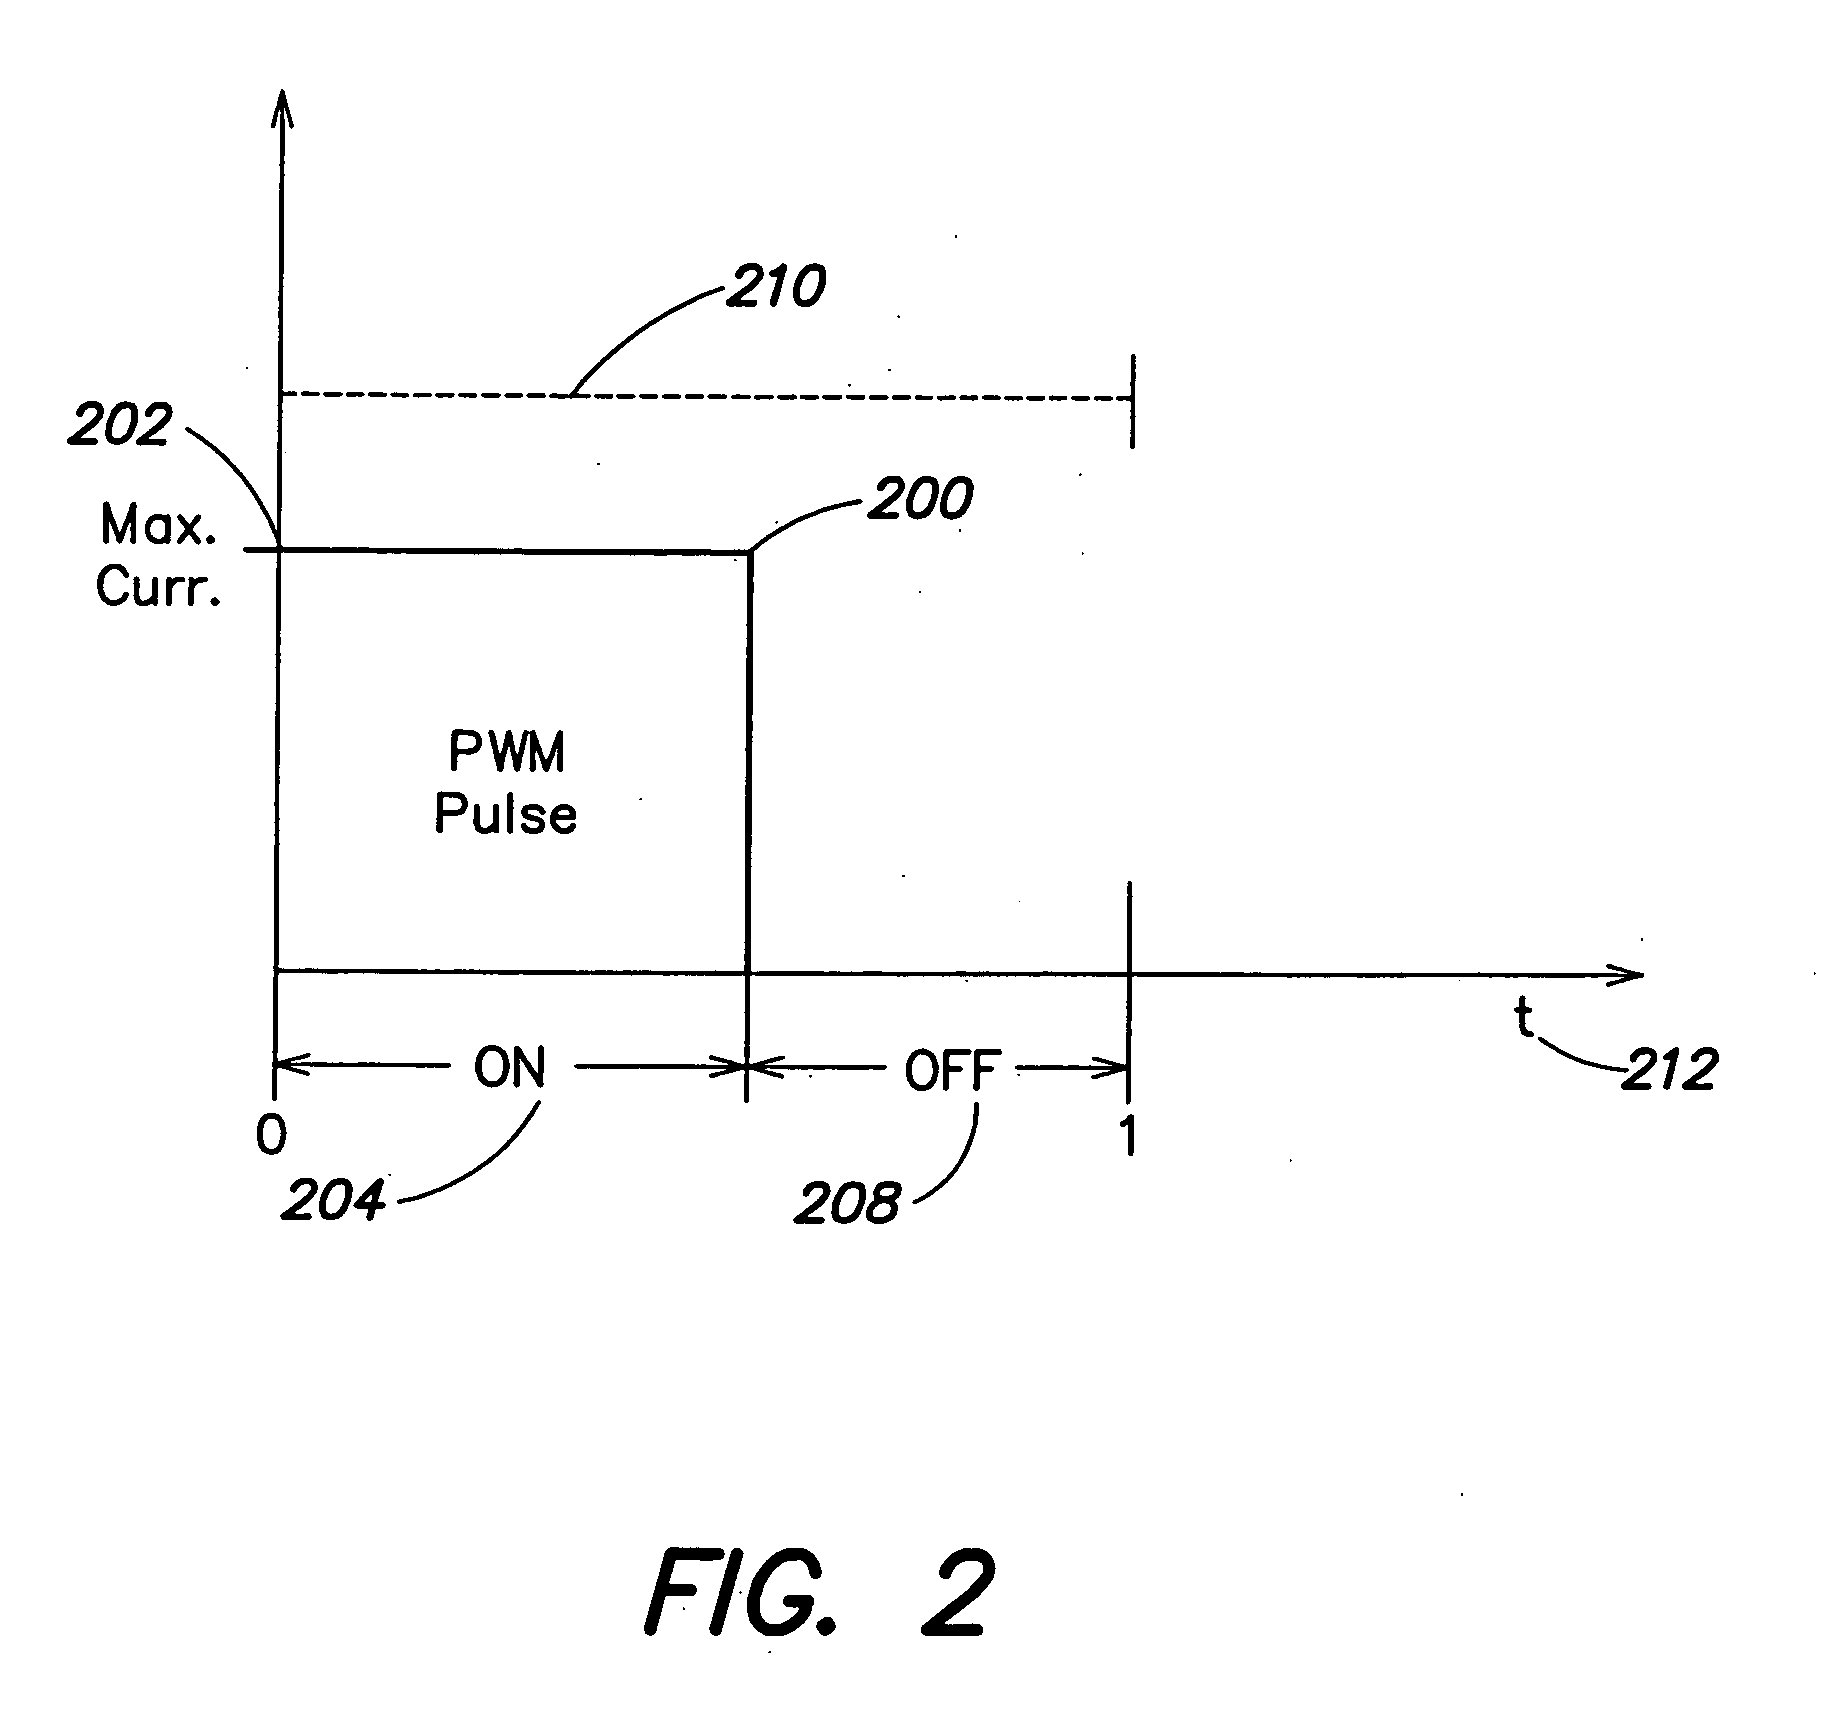 Systems and methods for controlling illumination sources